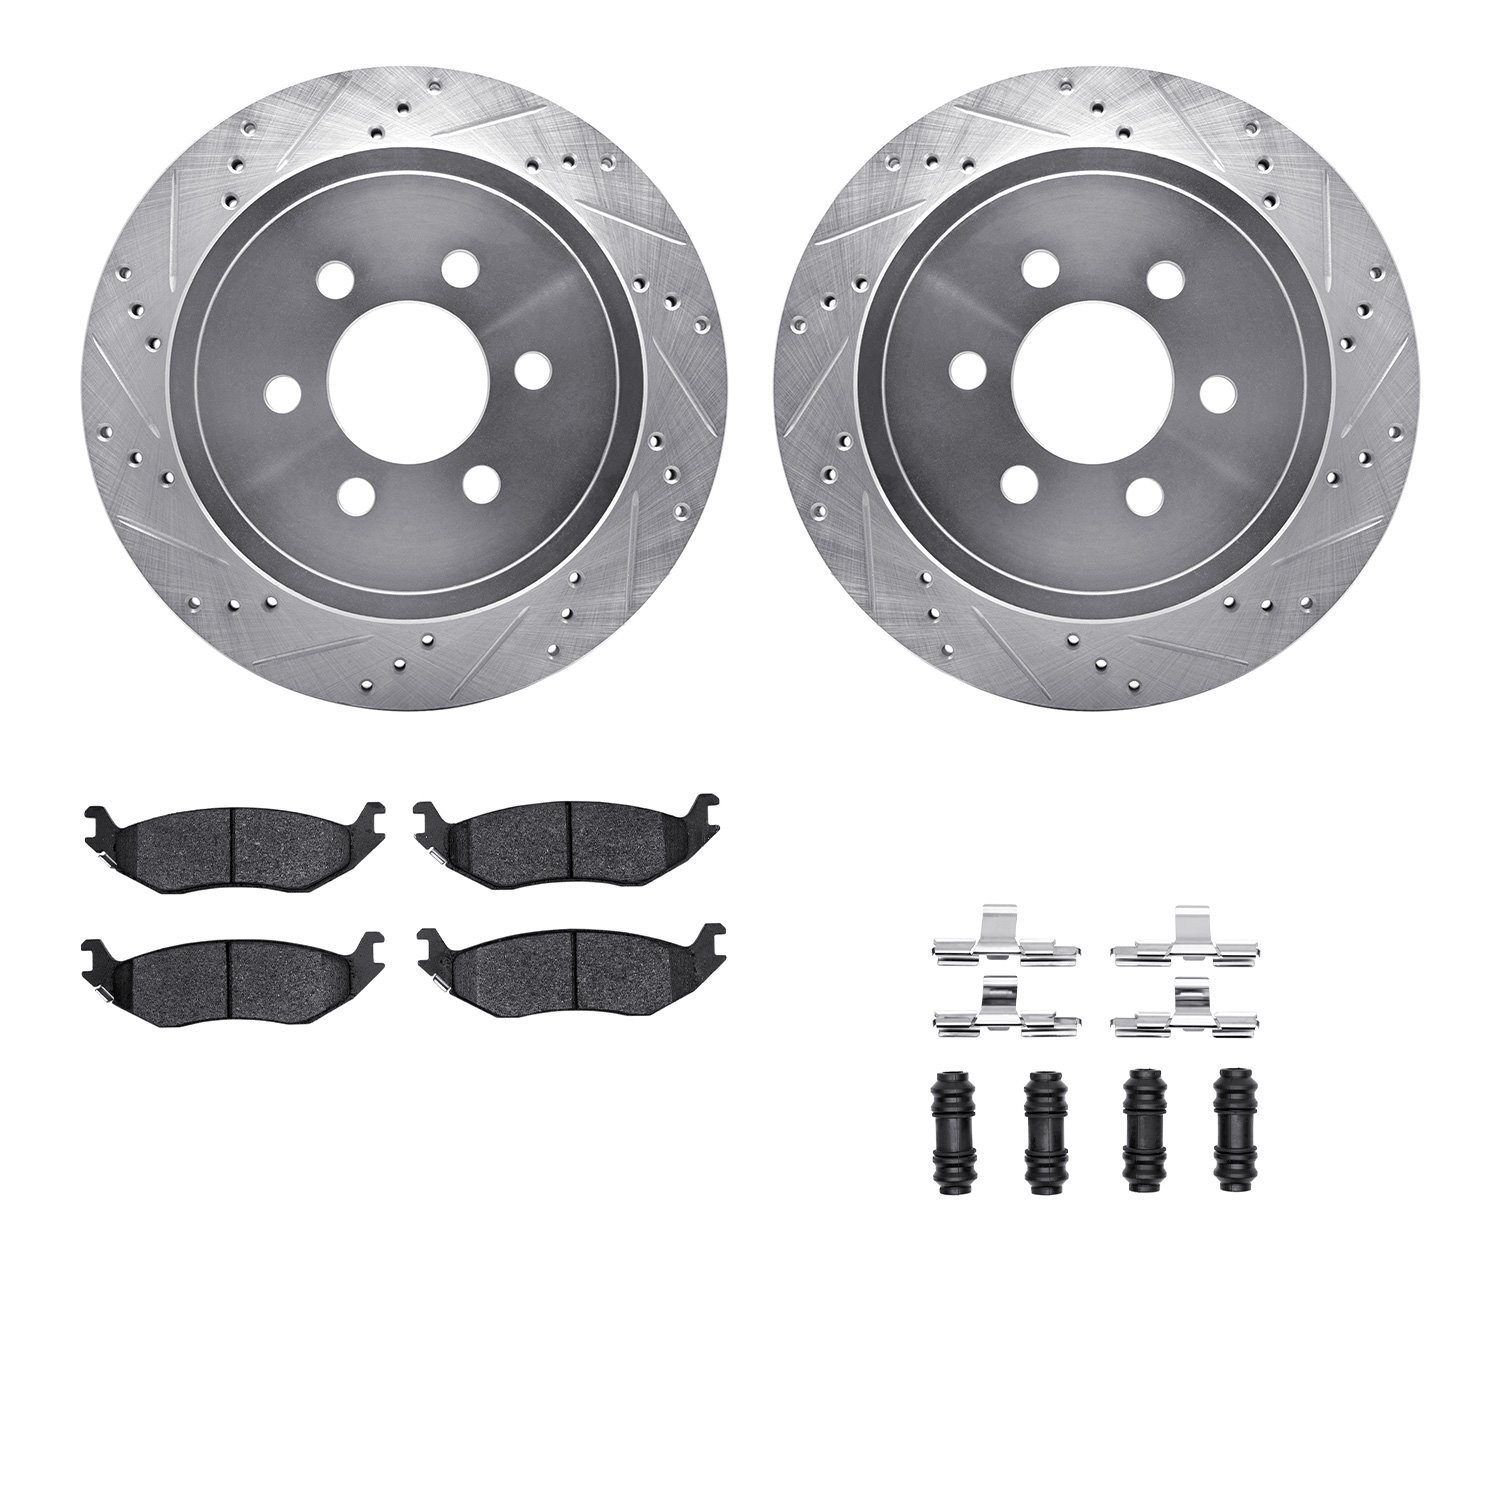 7412-40015 Drilled/Slotted Brake Rotors with Ultimate-Duty Brake Pads Kit & Hardware [Silver], 2003-2003 Mopar, Position: Rear